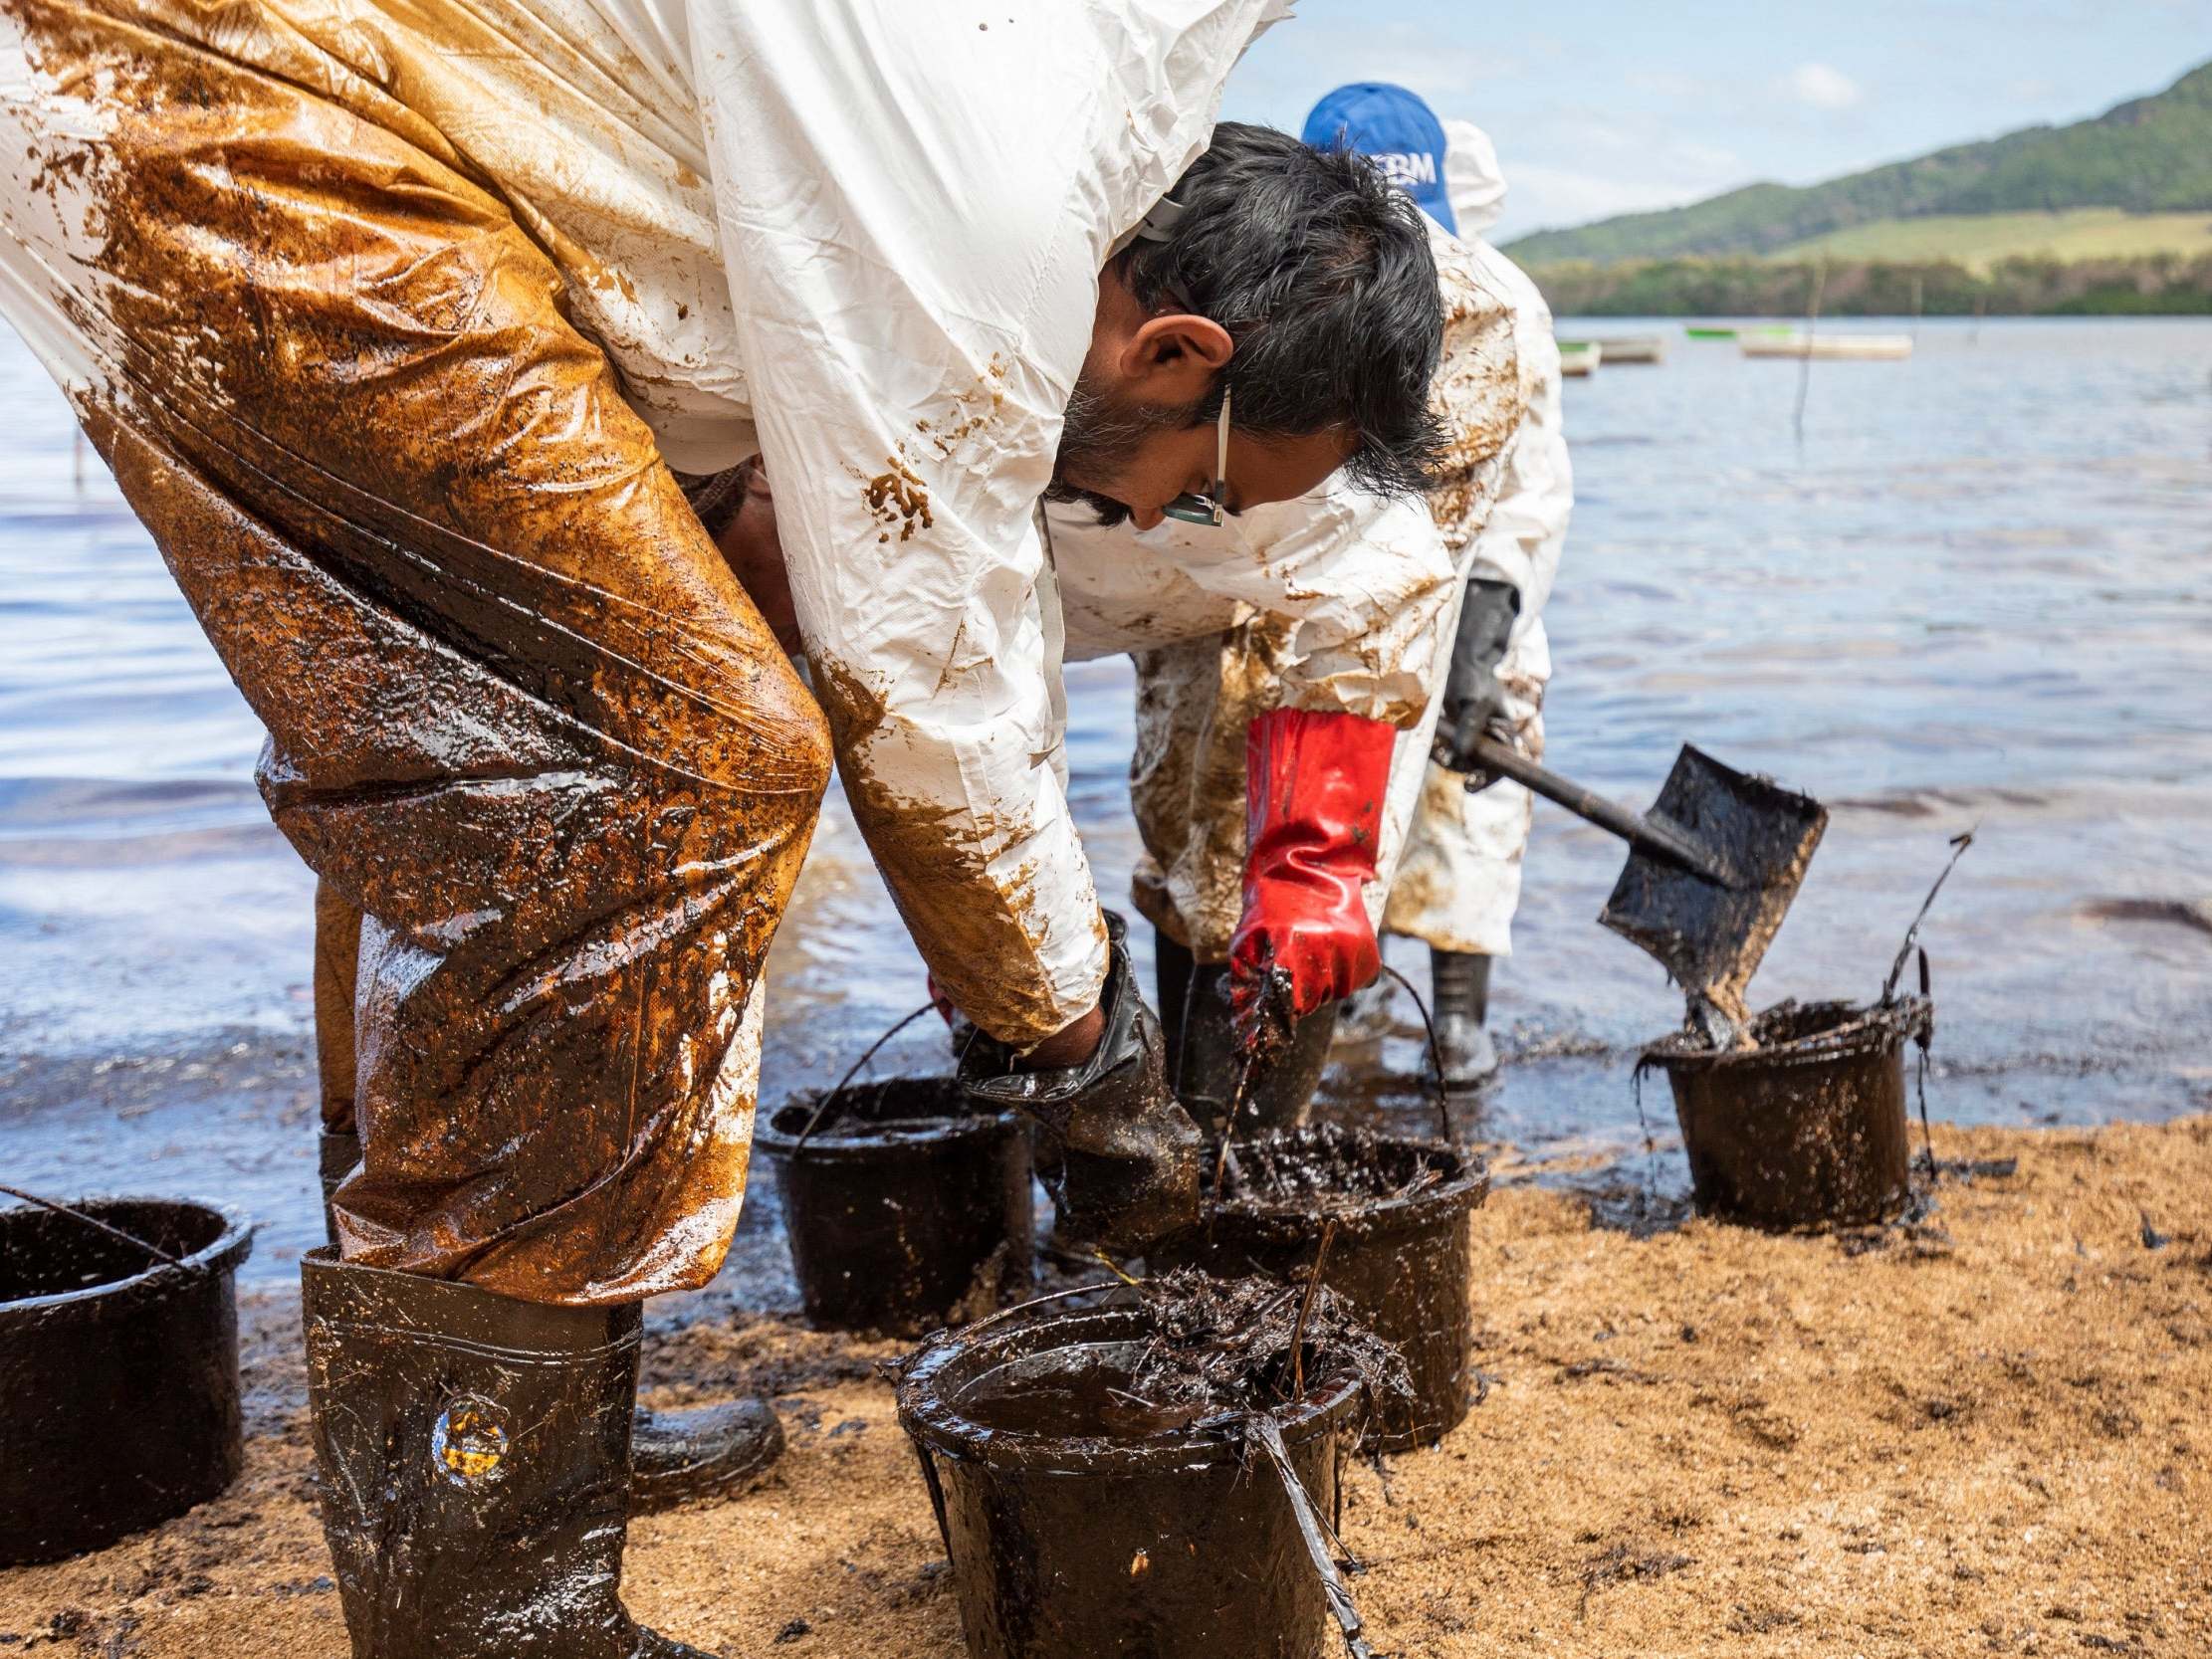 Local volunteers clean up oil washing up on the beach from the MV Wakashio